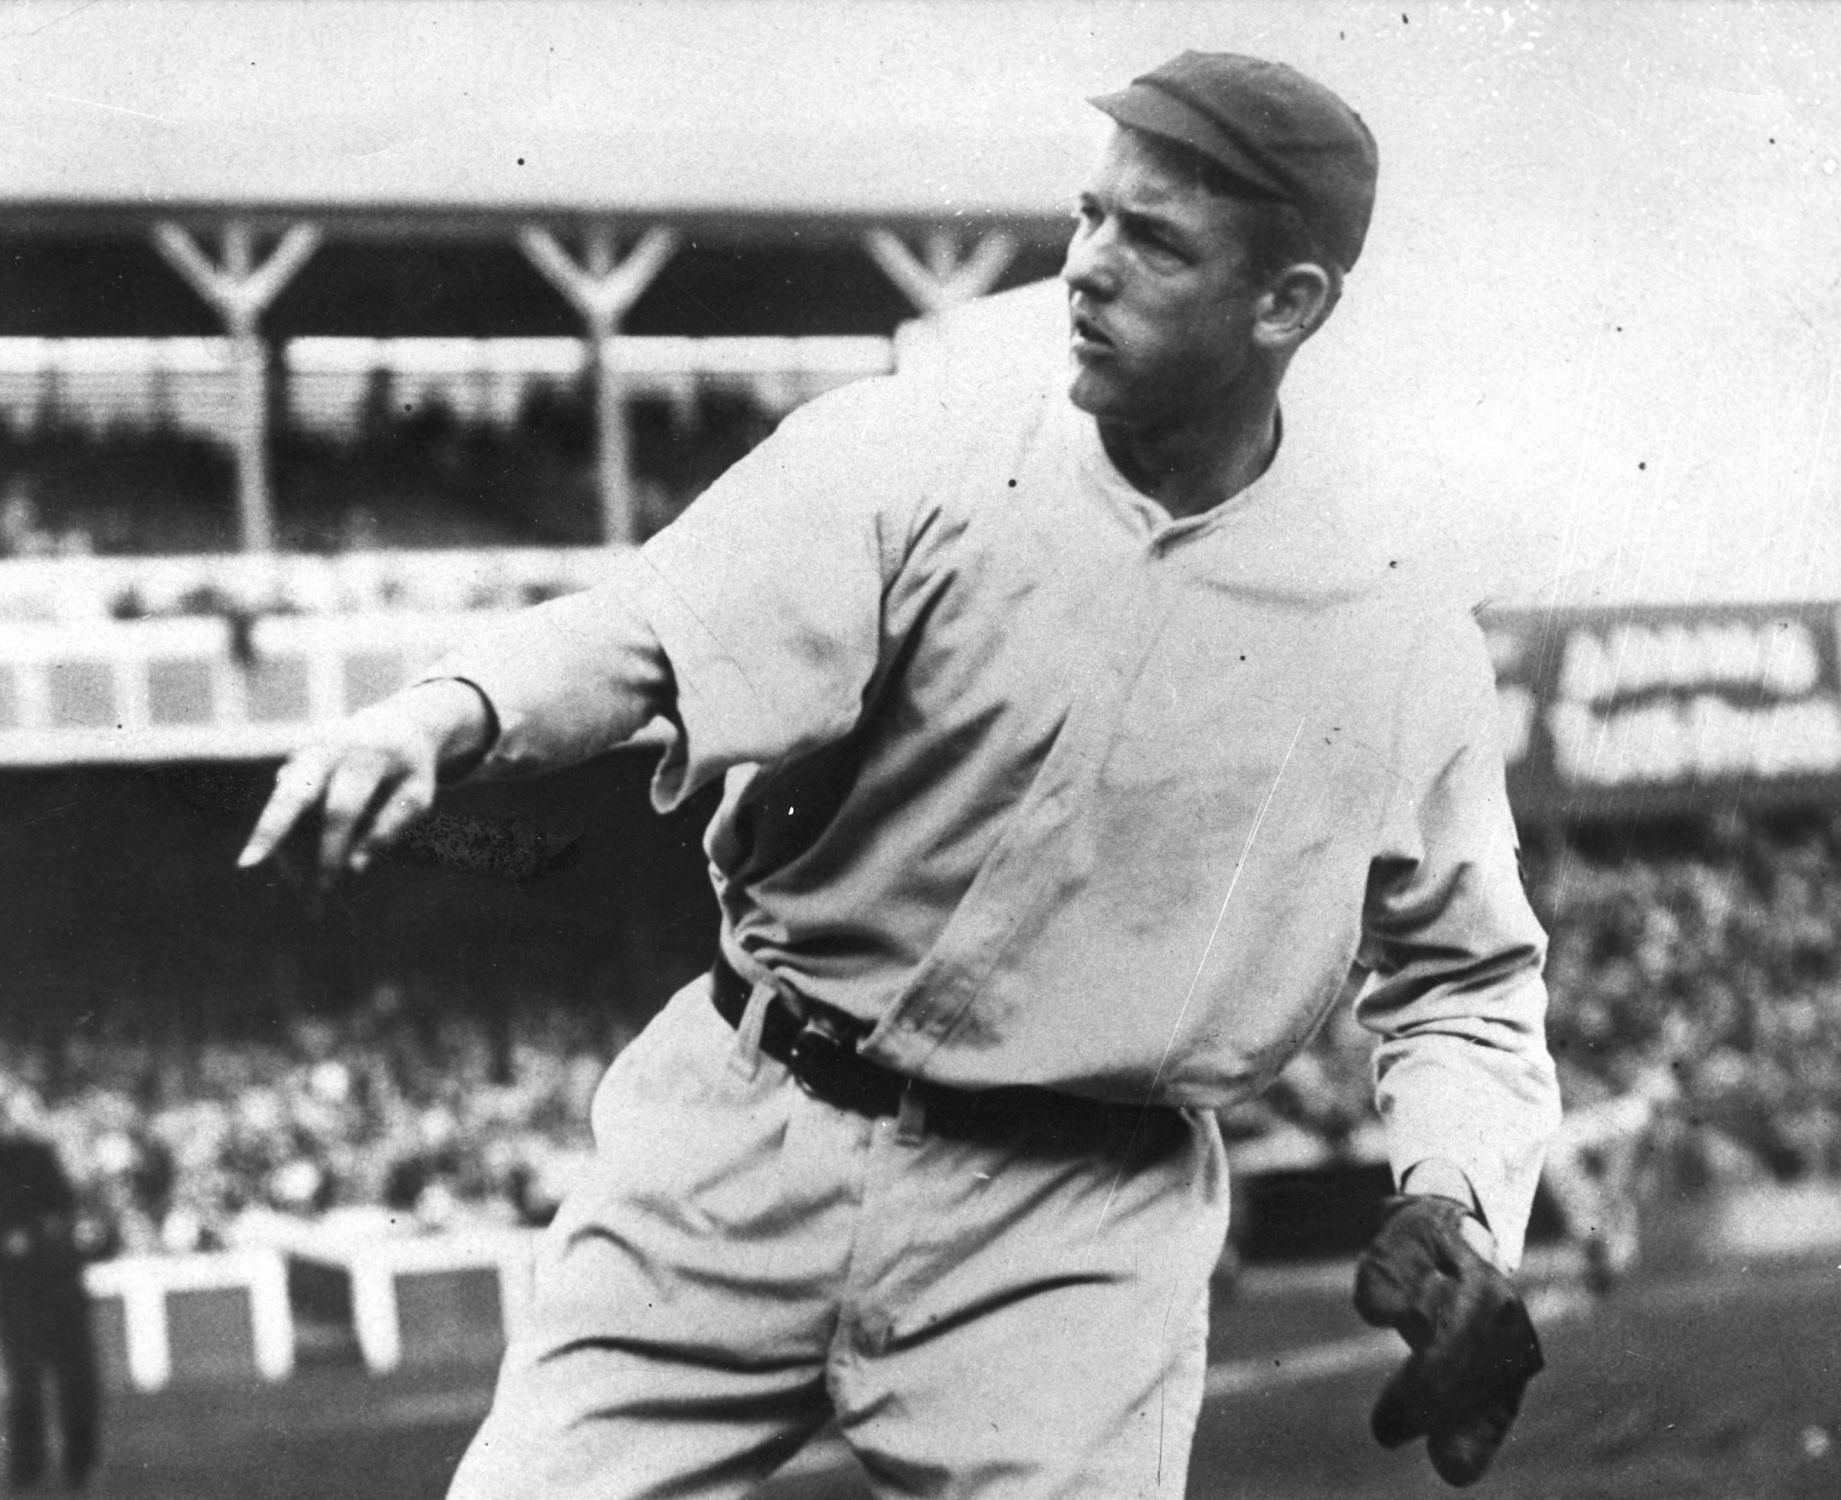 Christy Mathewson pitching for the New York Giants